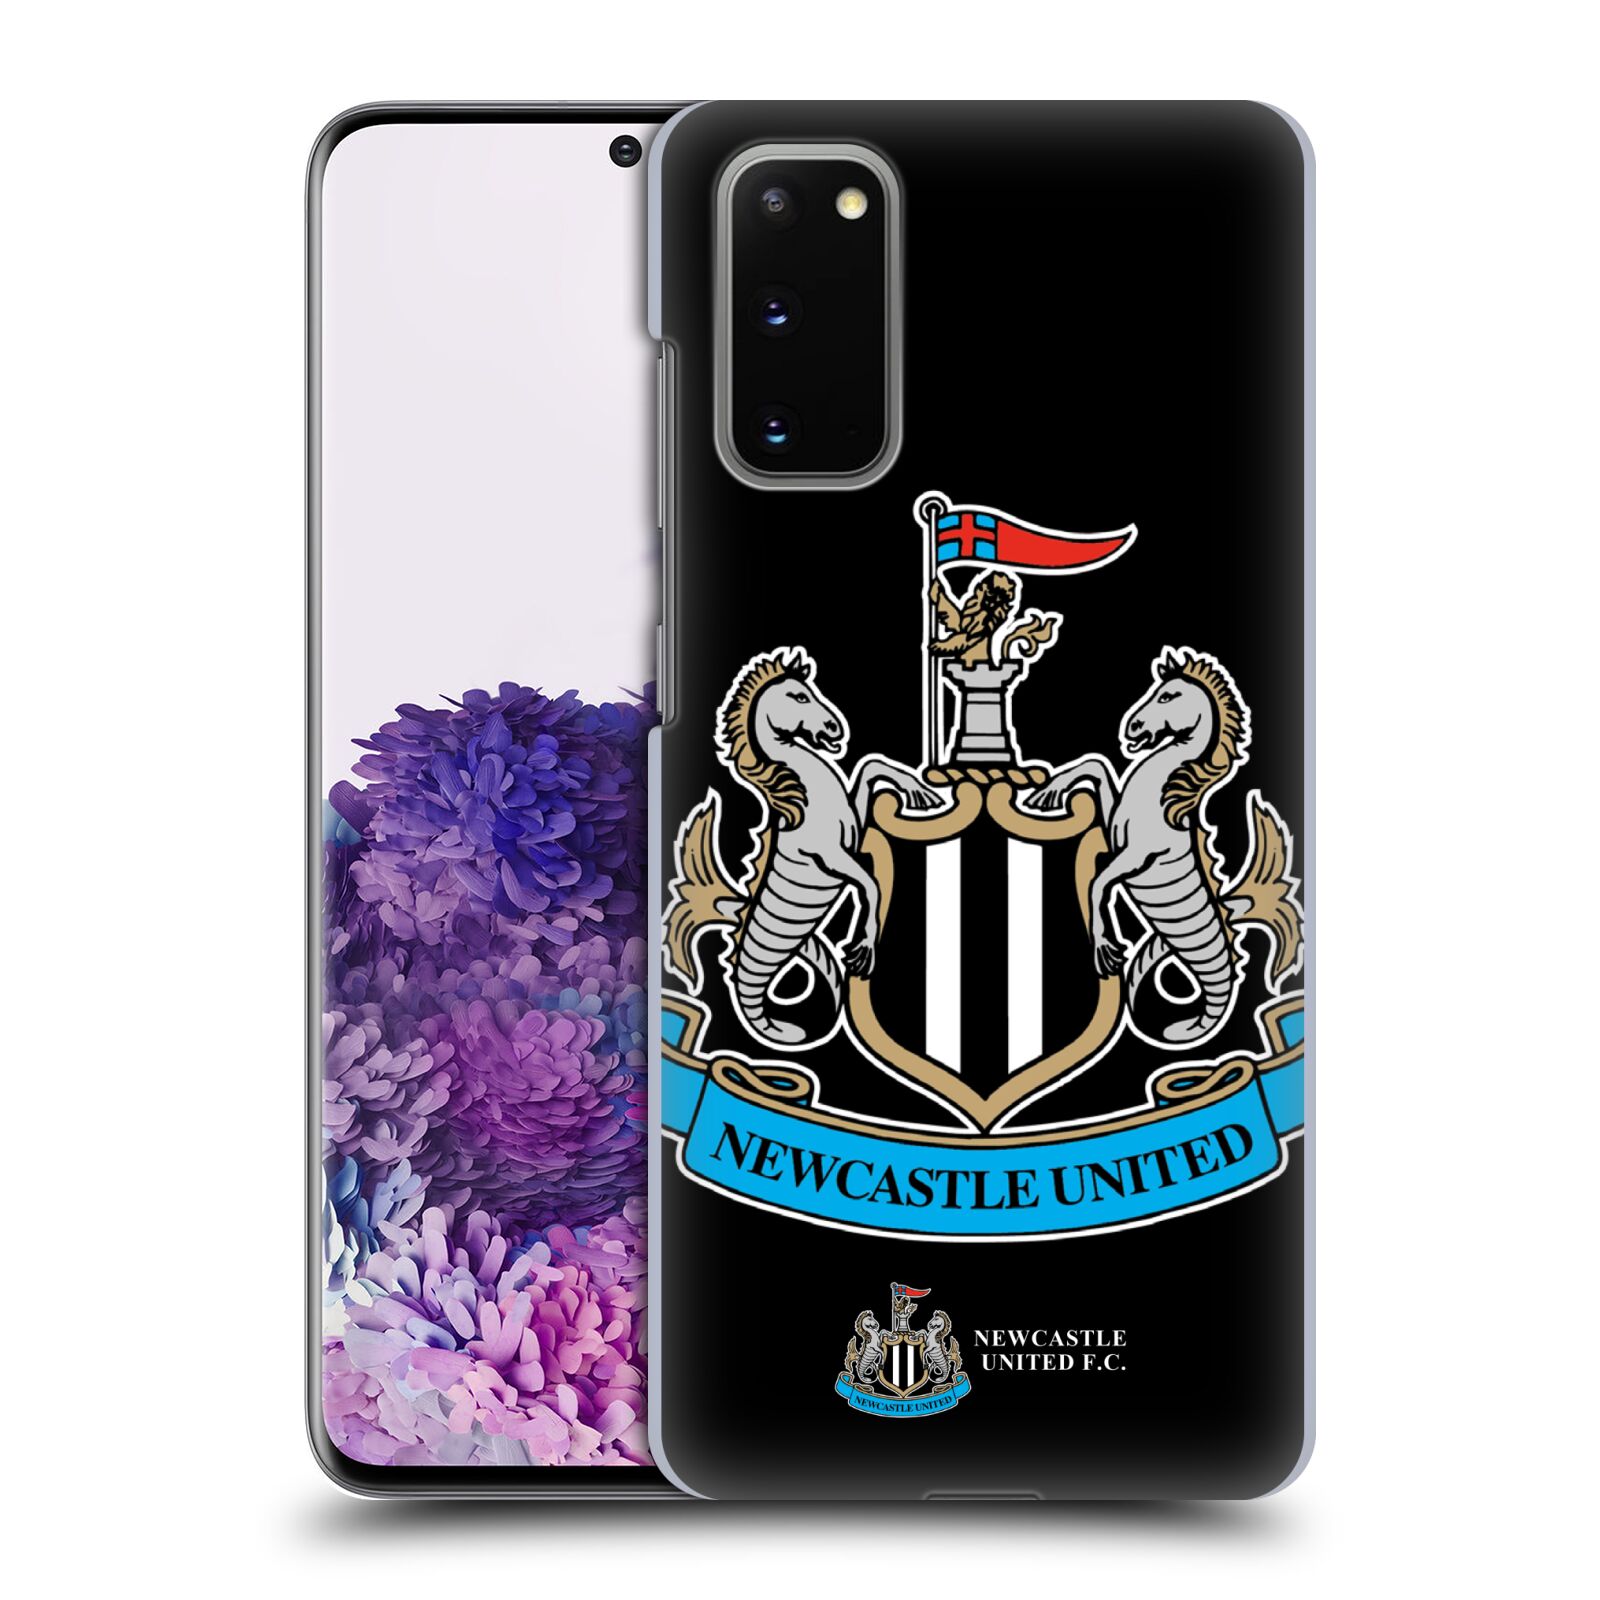 Custom Customized Personalized Newcastle United FC NUFC Distressed 2018/19 Crest Leather Book Wallet Case Cover Compatible for Samsung Galaxy S9 